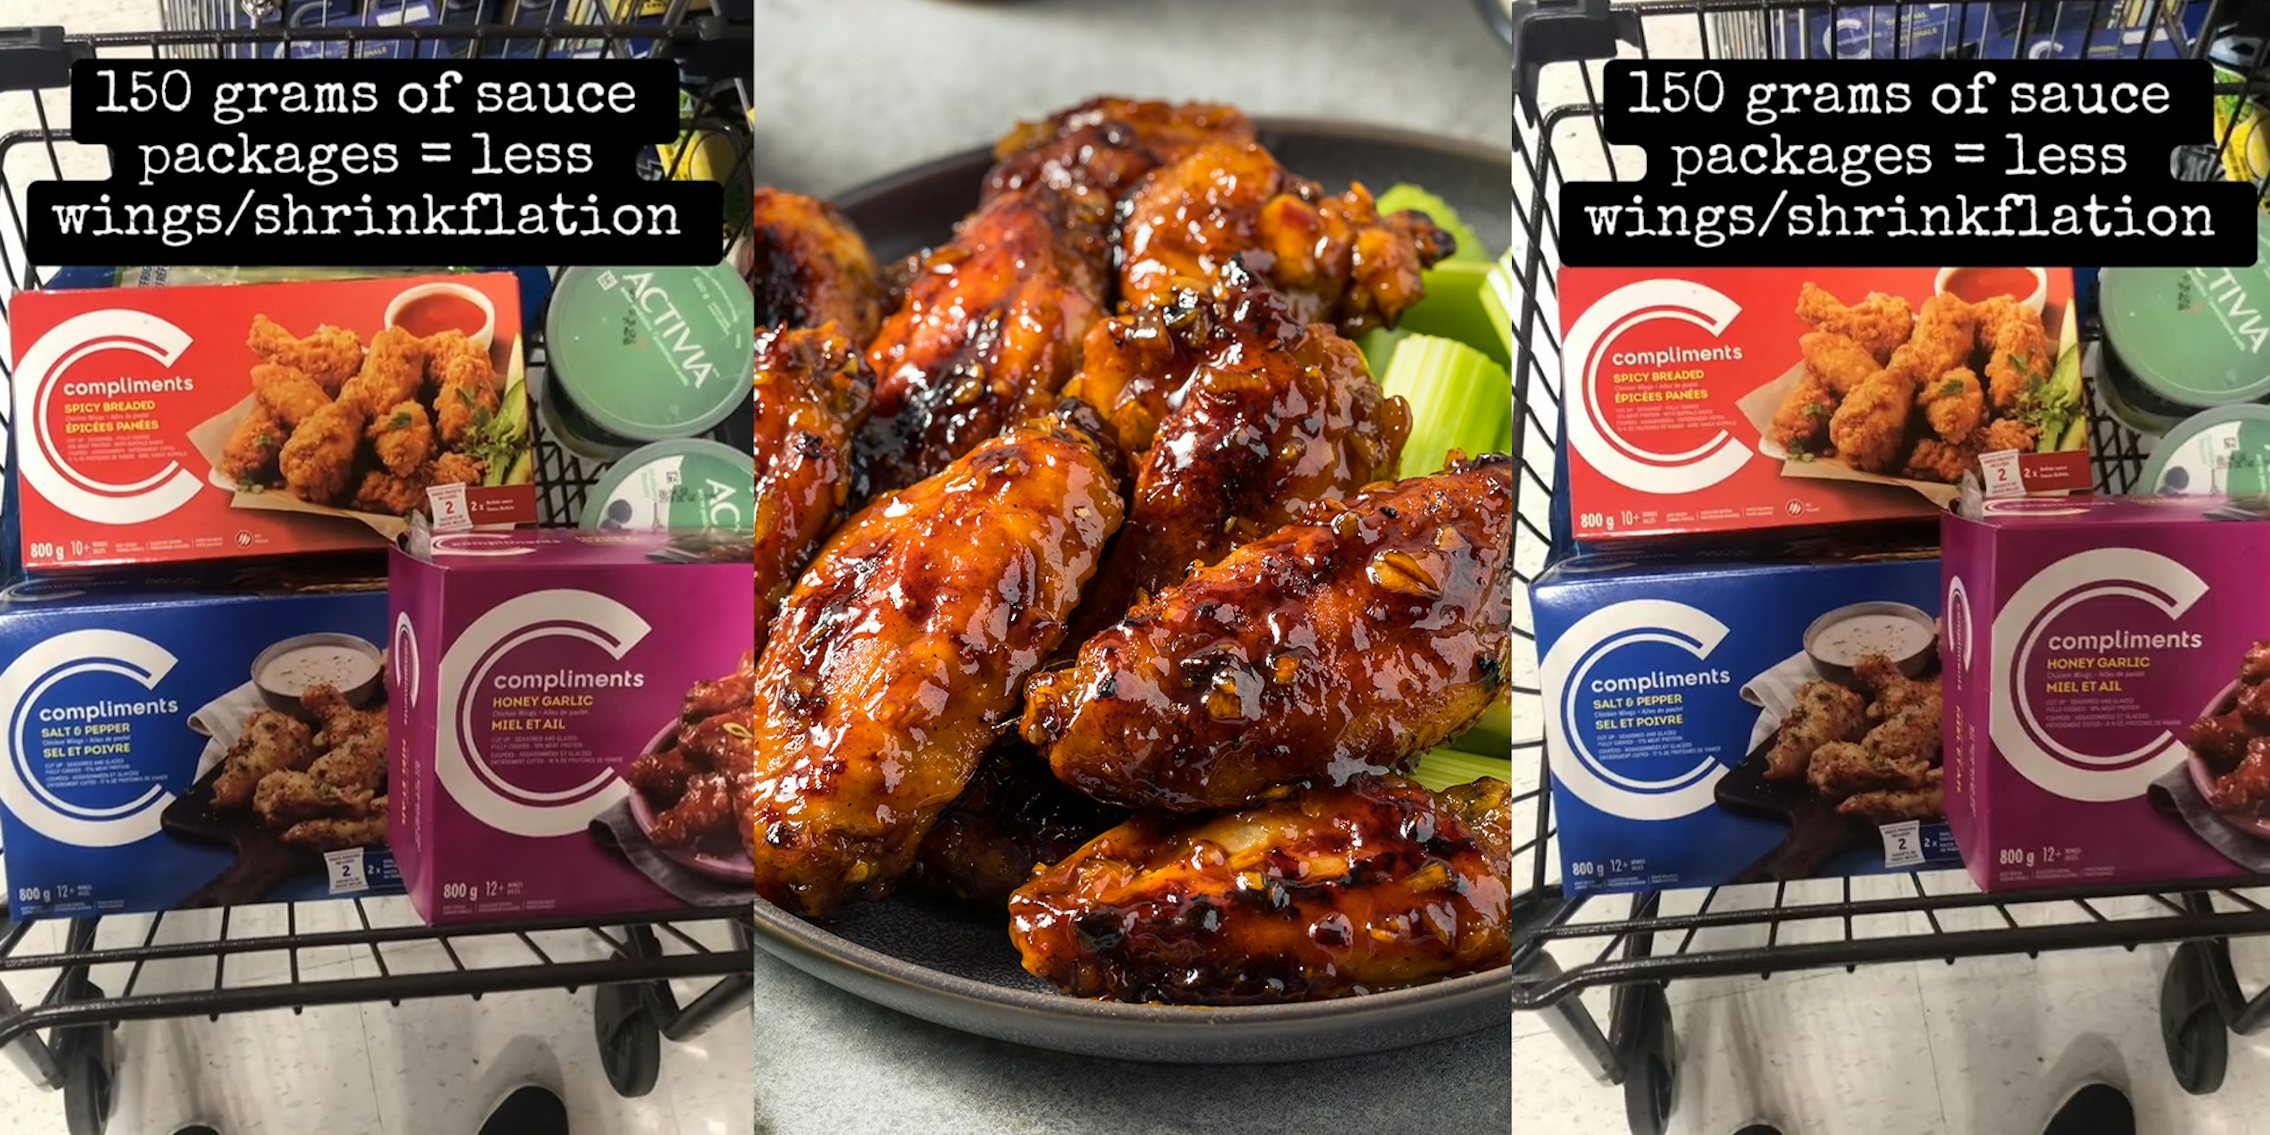 Sobey's Compliments Wings in shopping cart at store; Honey Garlic Wings on plate